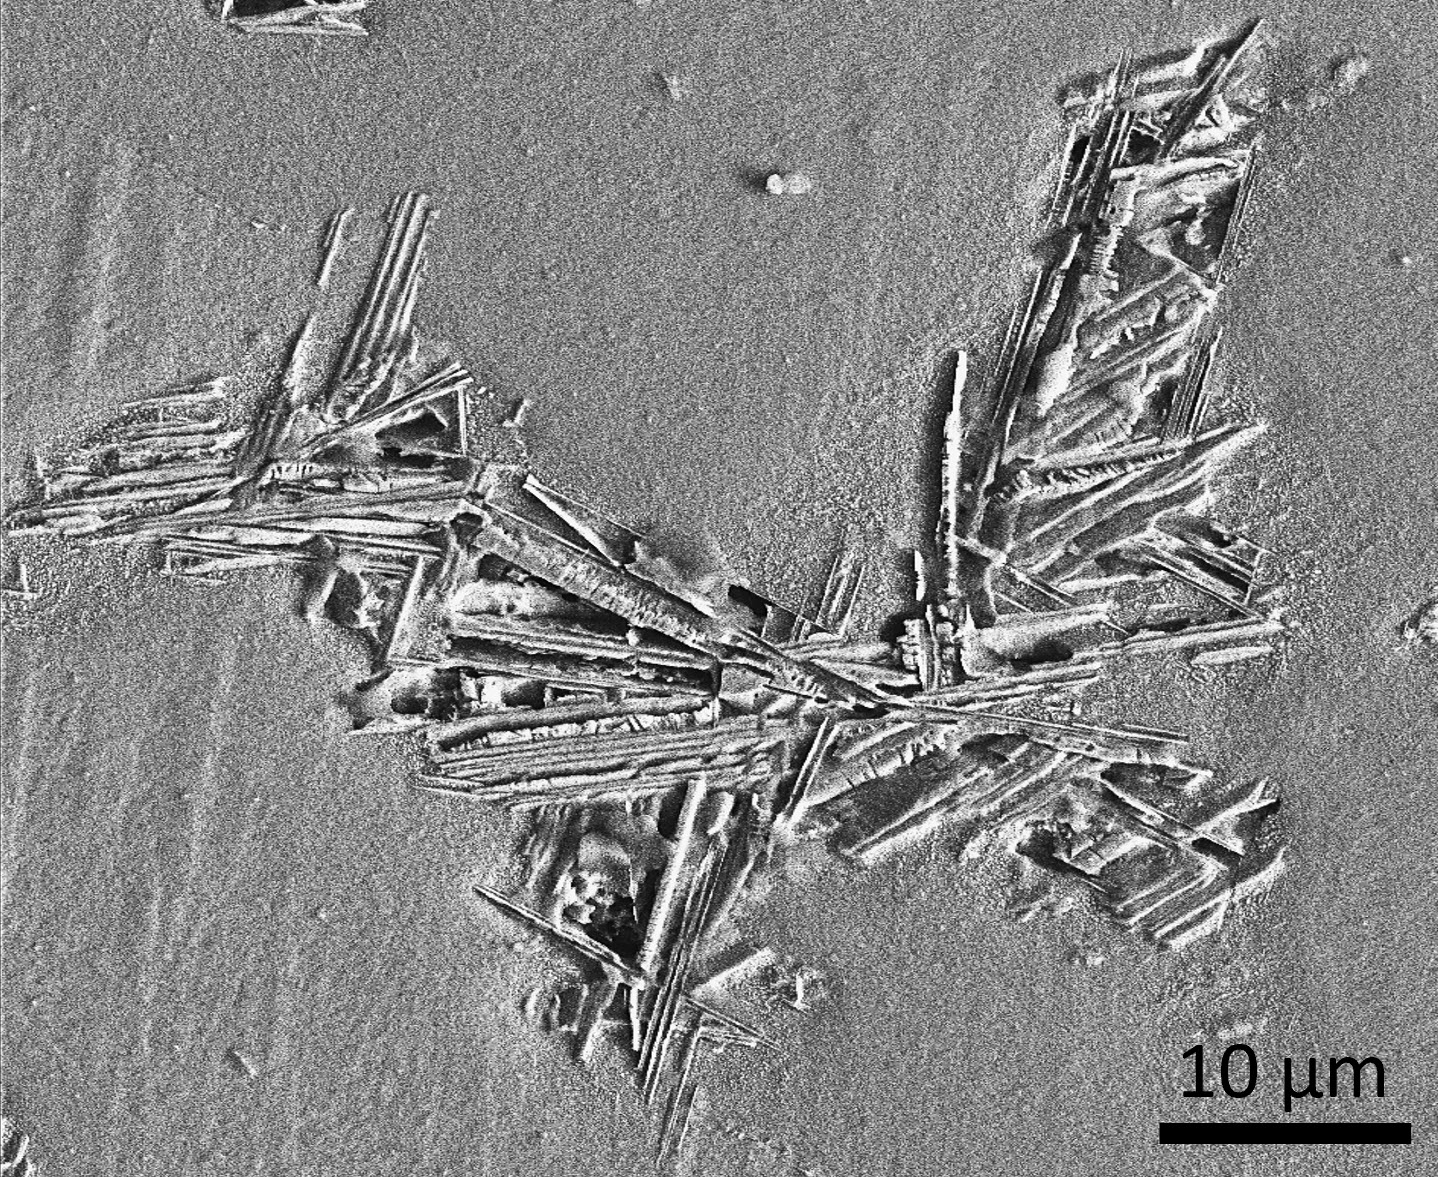 TITLE: Wings of HEA; SUBJECT: SEM image of Intermetallic phases in High entropy alloys after polishing and etching resembles butterfly wings. Image taken to establish microstructure - property correlation in HEAs; CREDIT: Bushra Harun, Indian Institute of Technology, Delhi; METHOD/INSTRUMENT: JEOL JSM 7800F PRIME FESEM